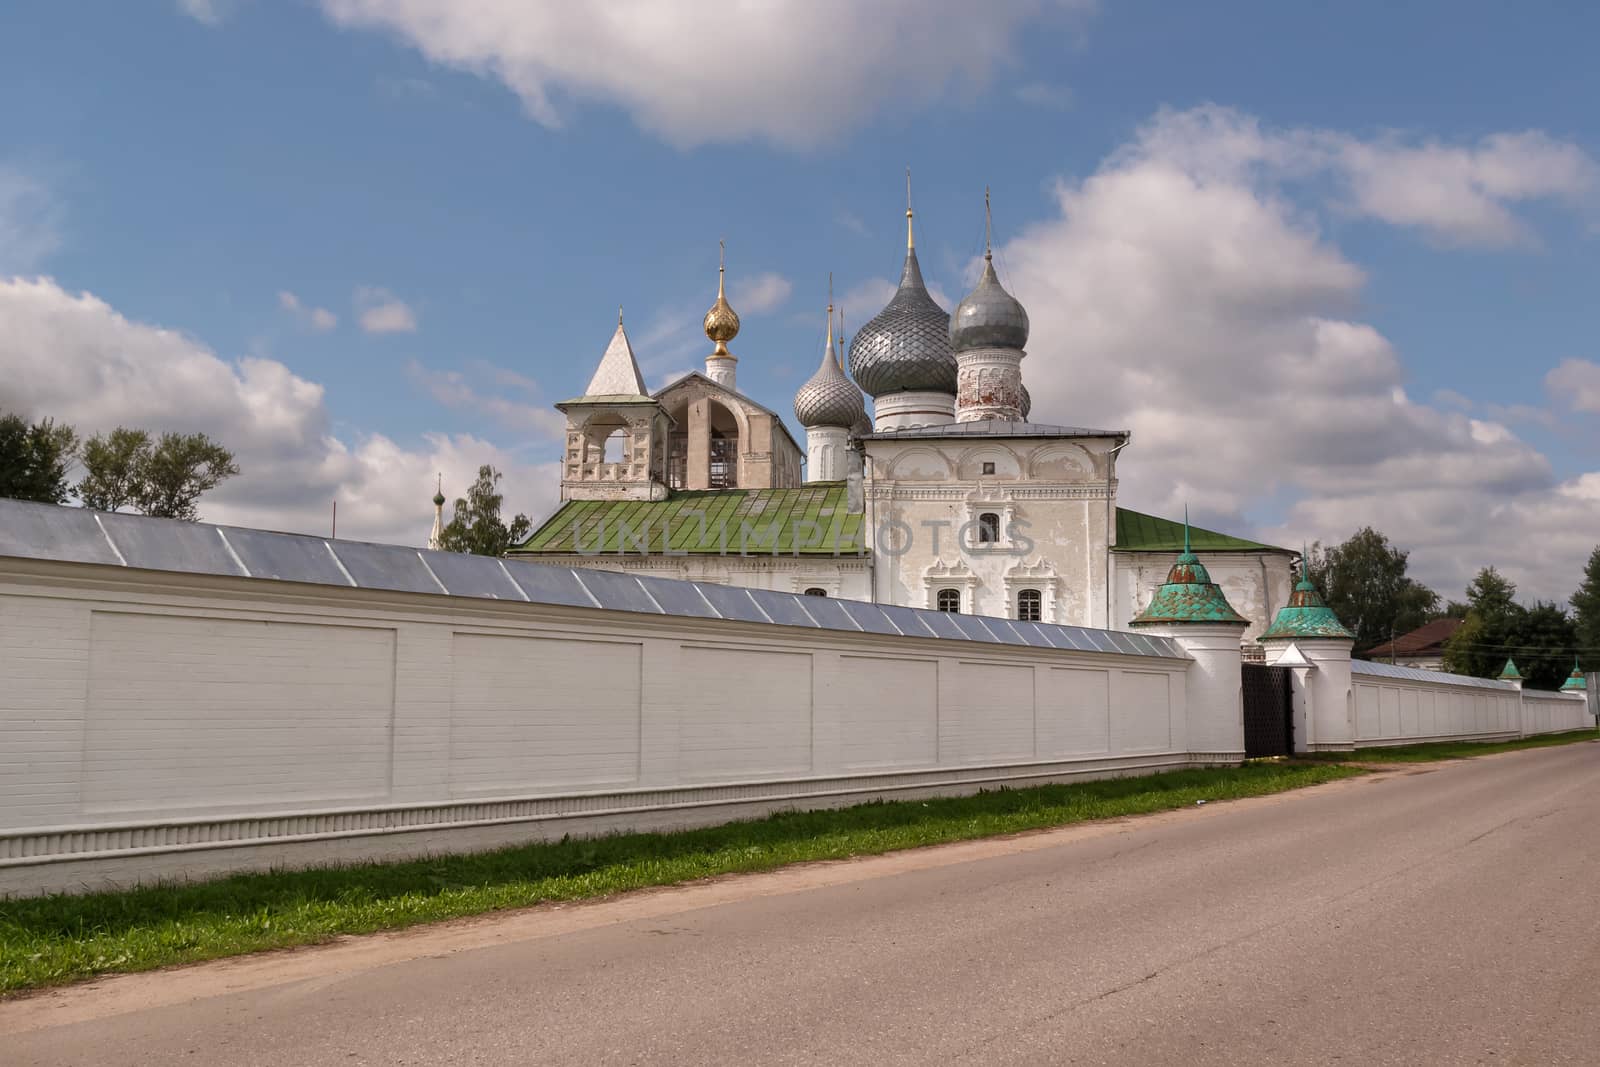 Resurrection monastery in Uglich, walls and churches by Gaina